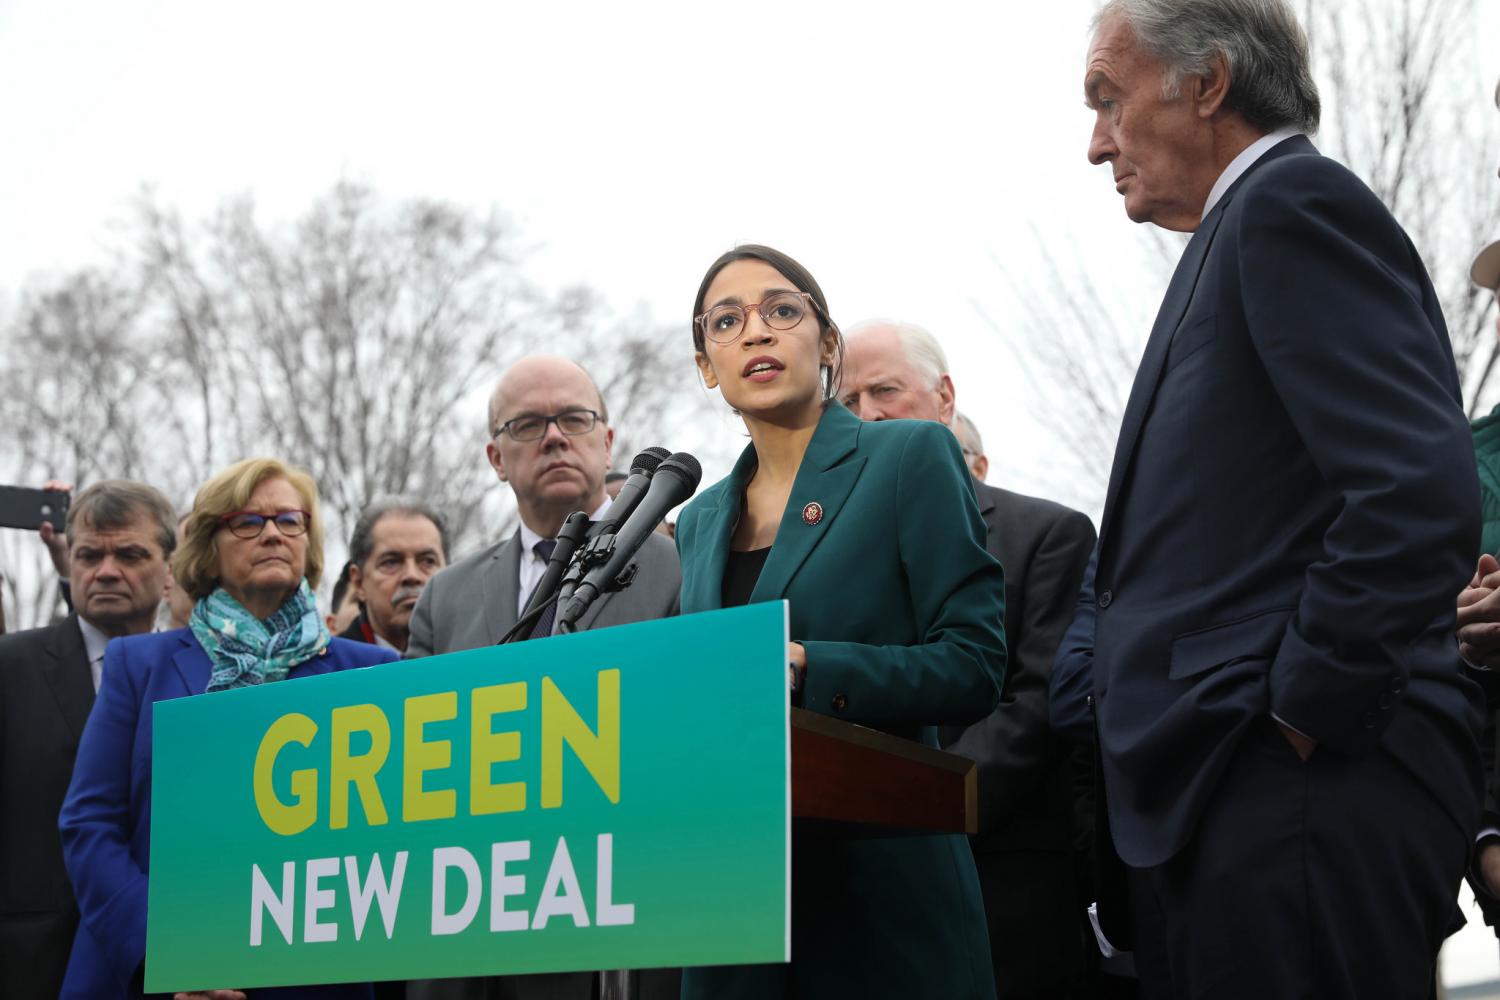 Everyone in the U.S. business community has an opinion about the Green New Deal introduced last week by Representative Alexandria Ocasio-Cortez.